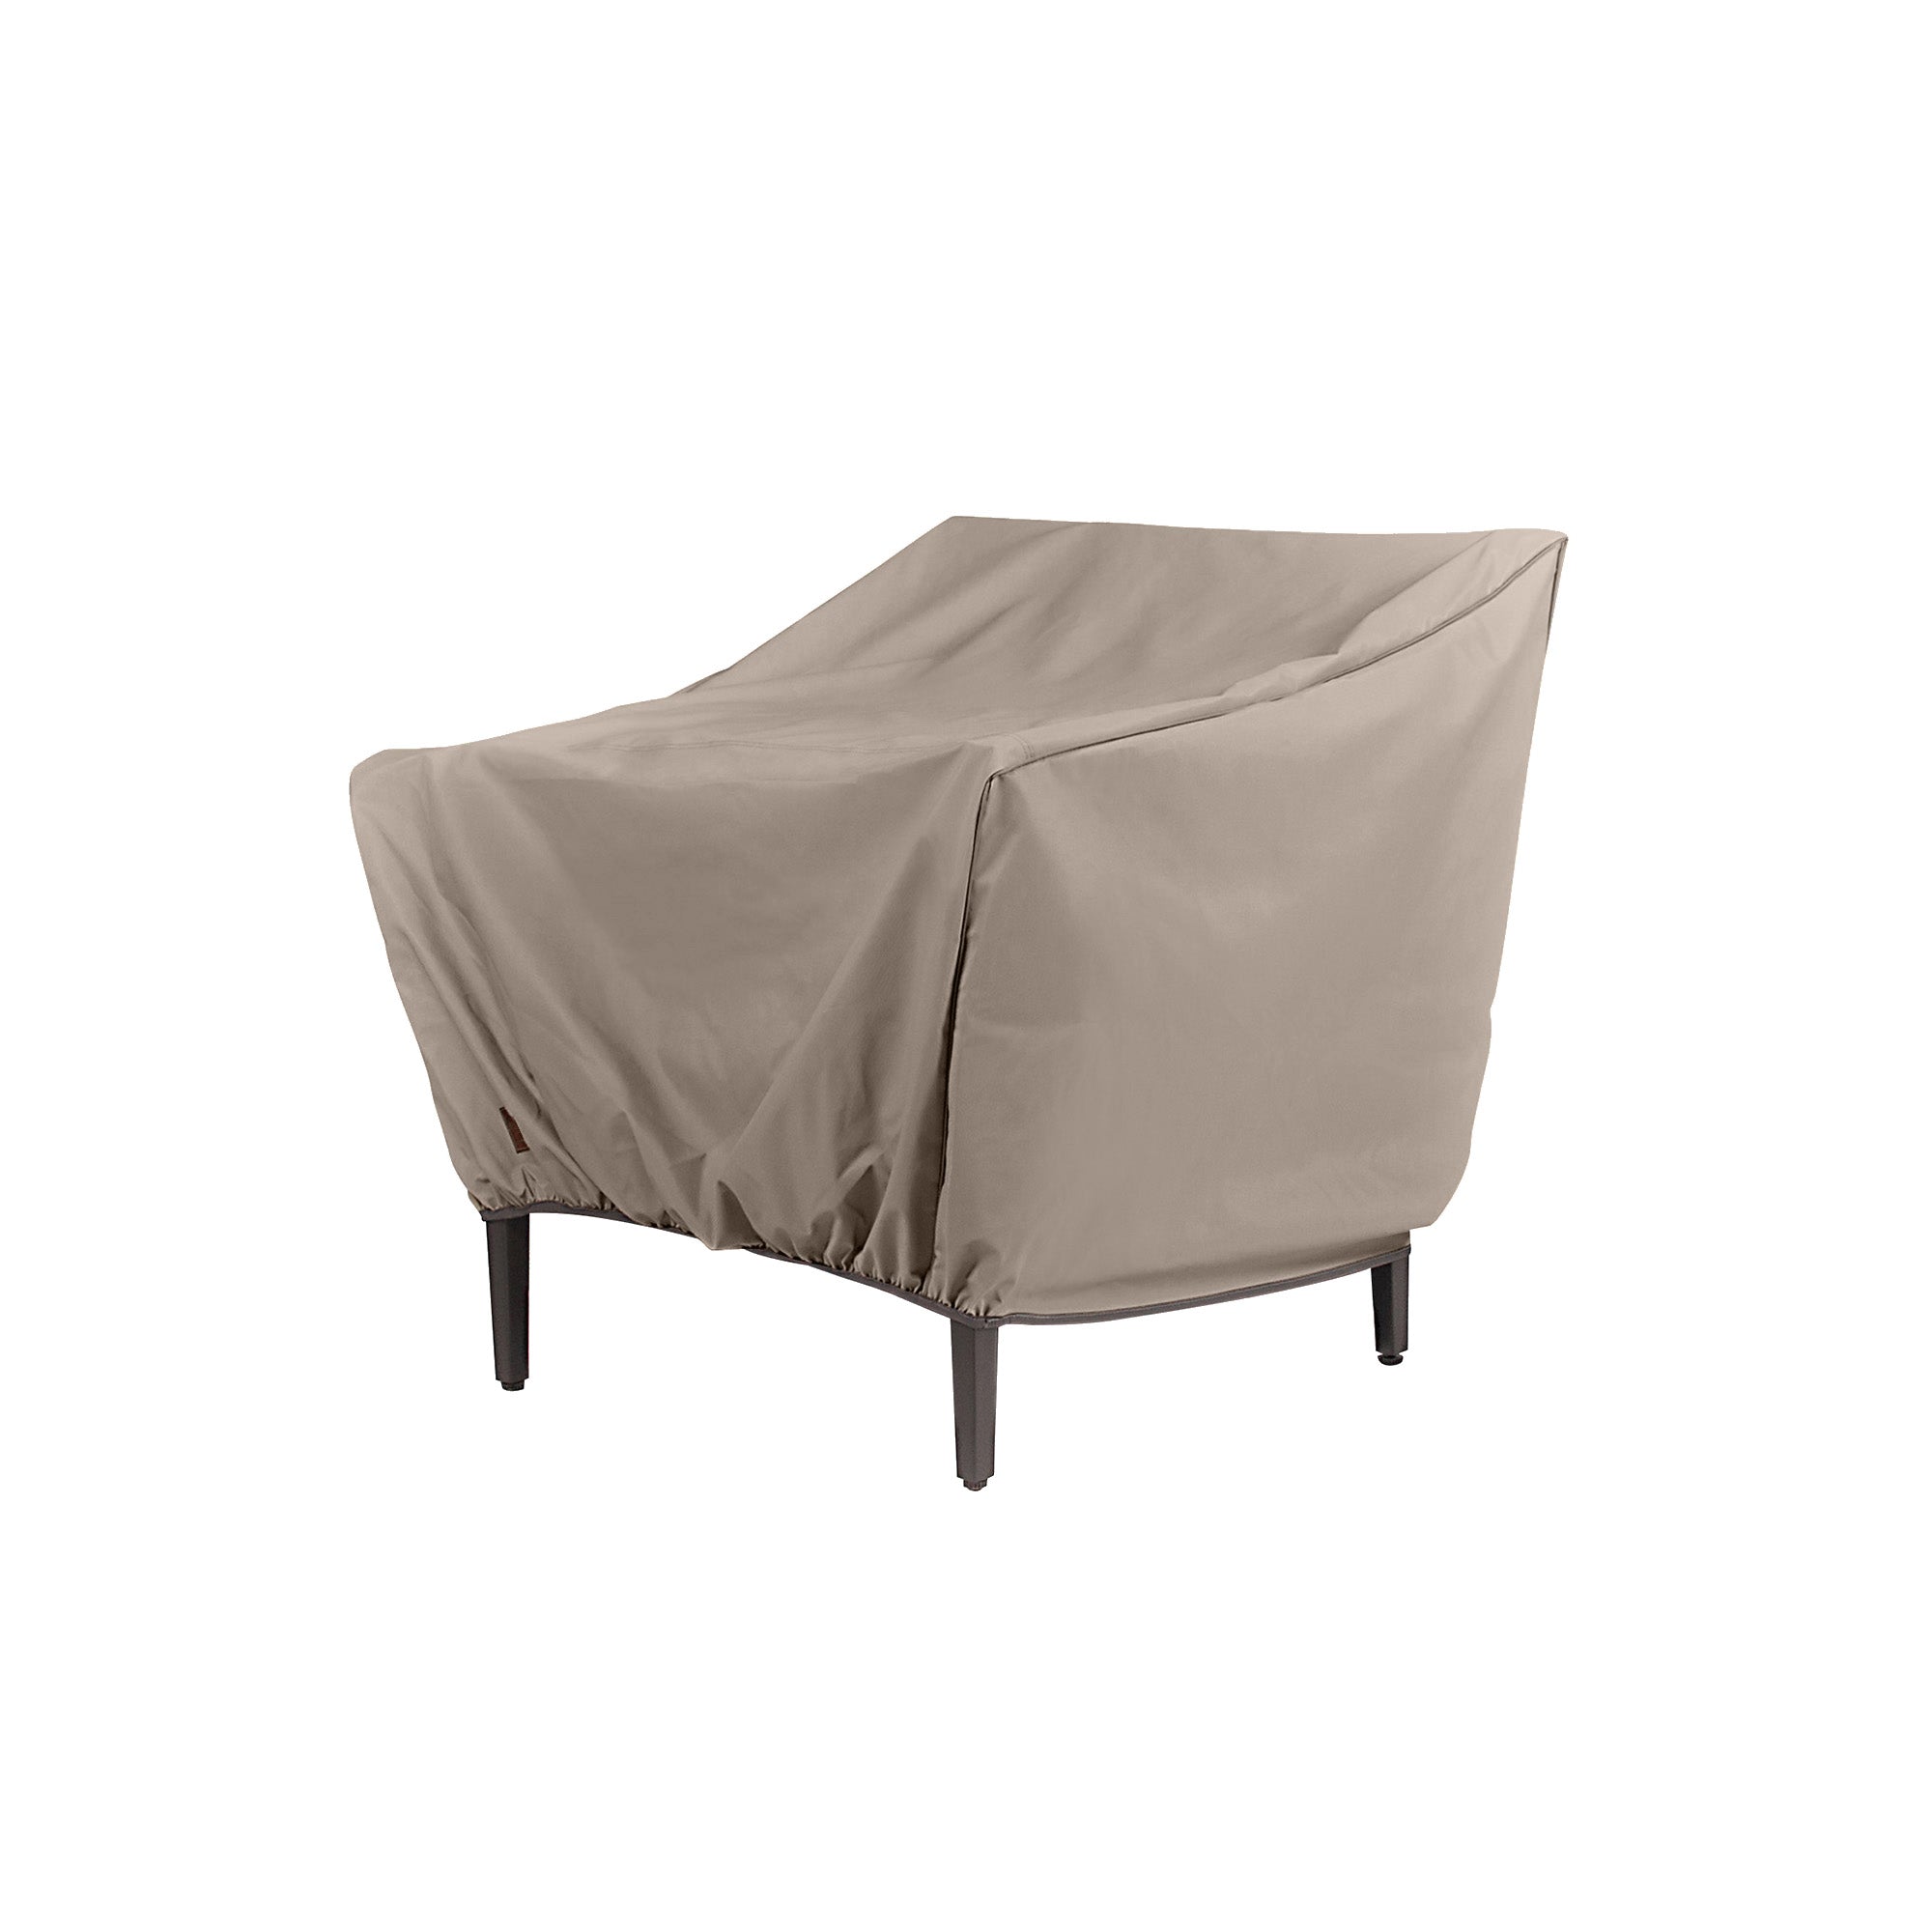 Low Back Lounge Patio Chair Cover